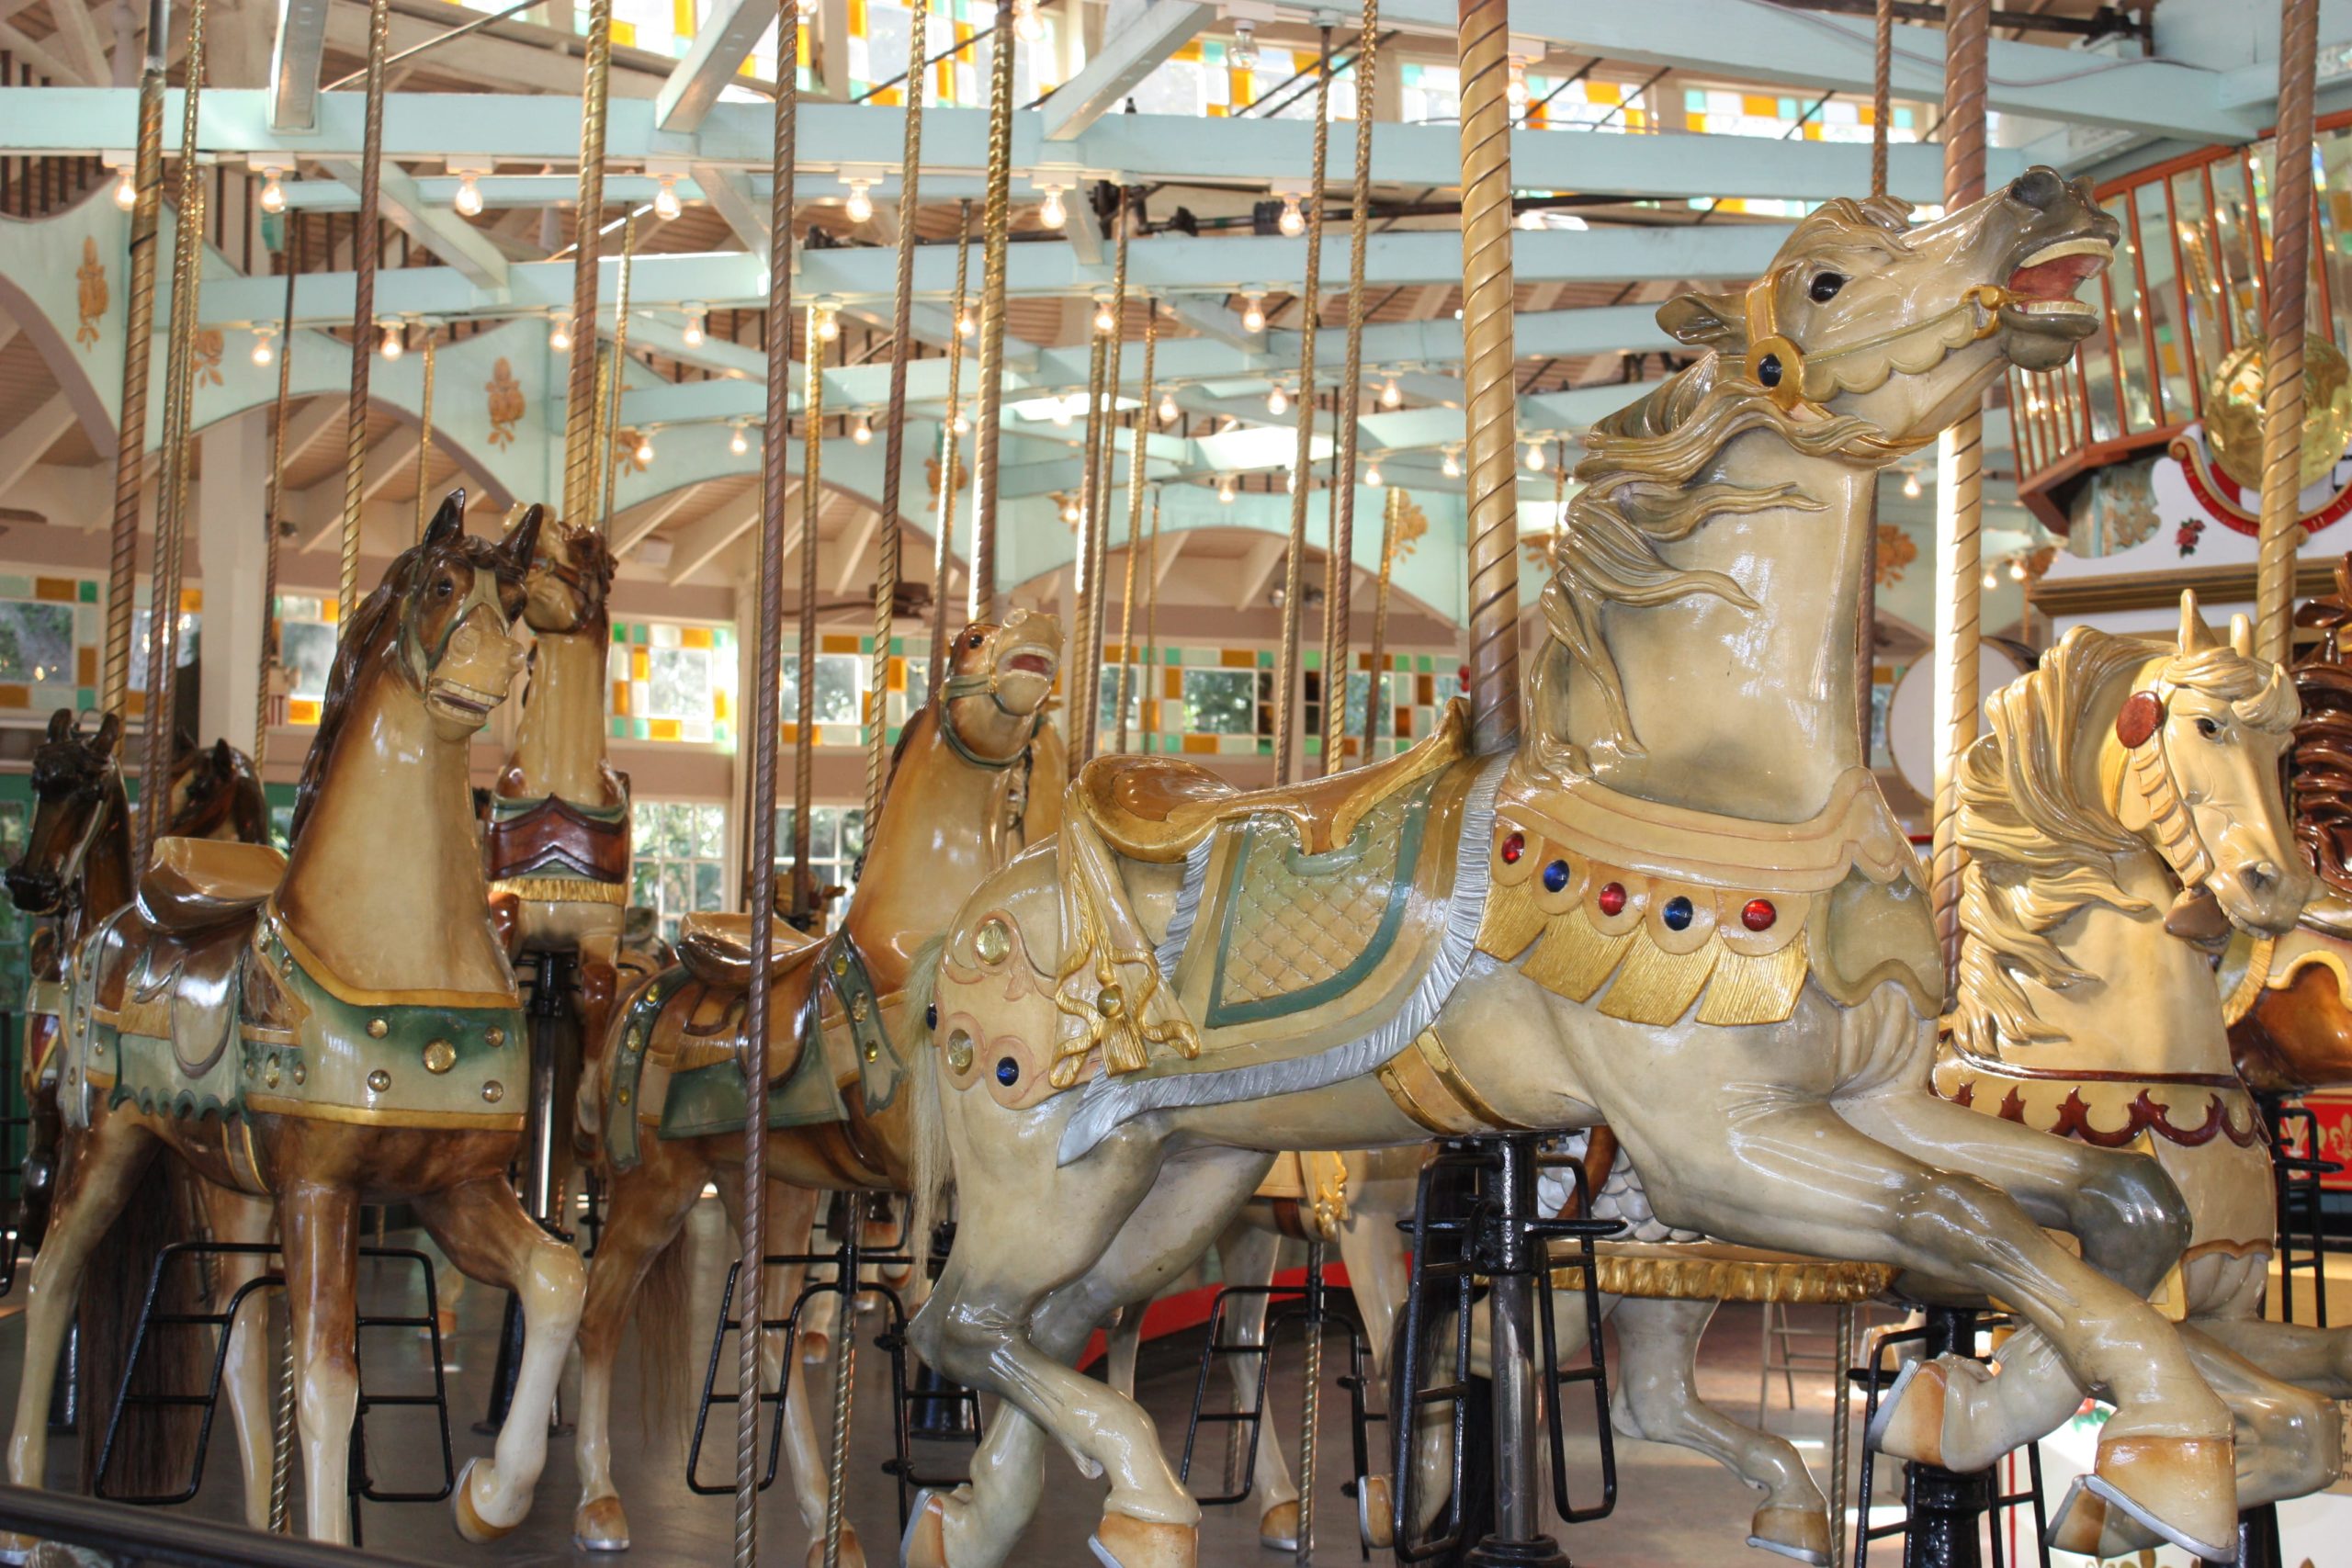 Carousel pictures 11 20 13 (47)